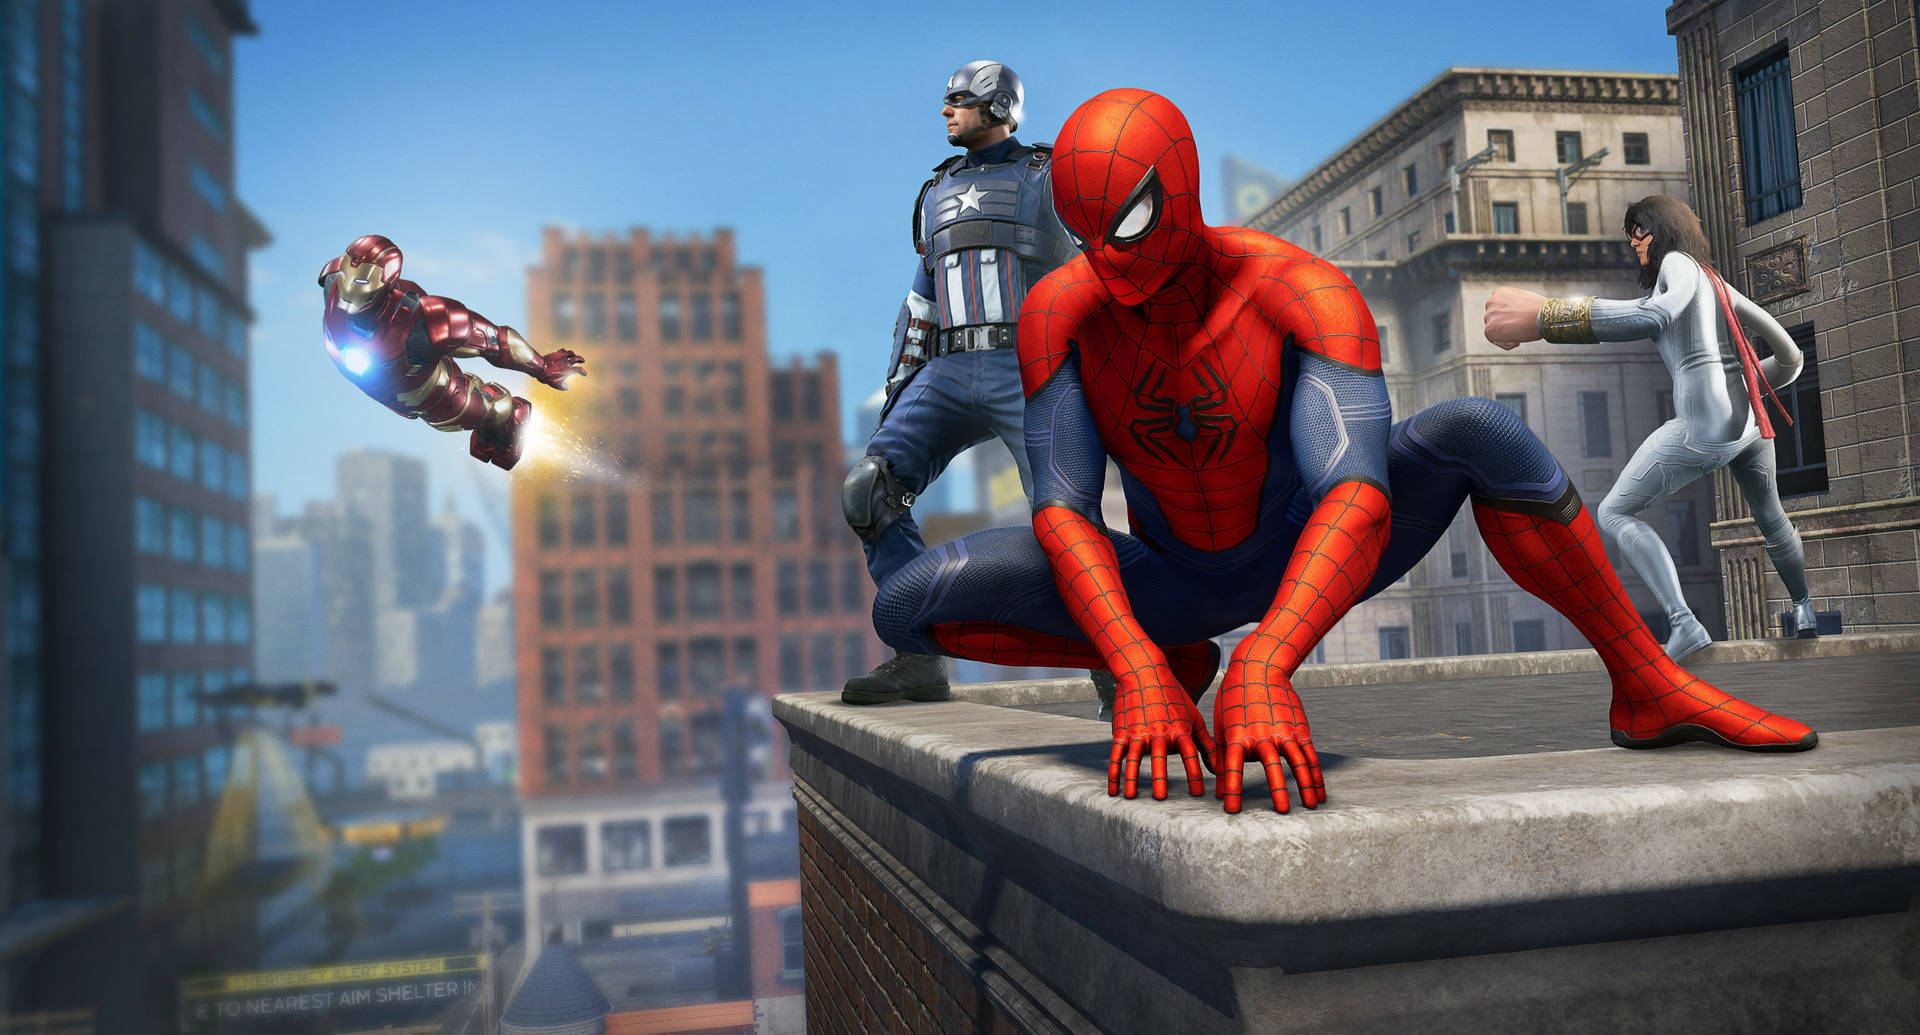 Rooftopmarvel Pc In Italian Can Be Translated As 